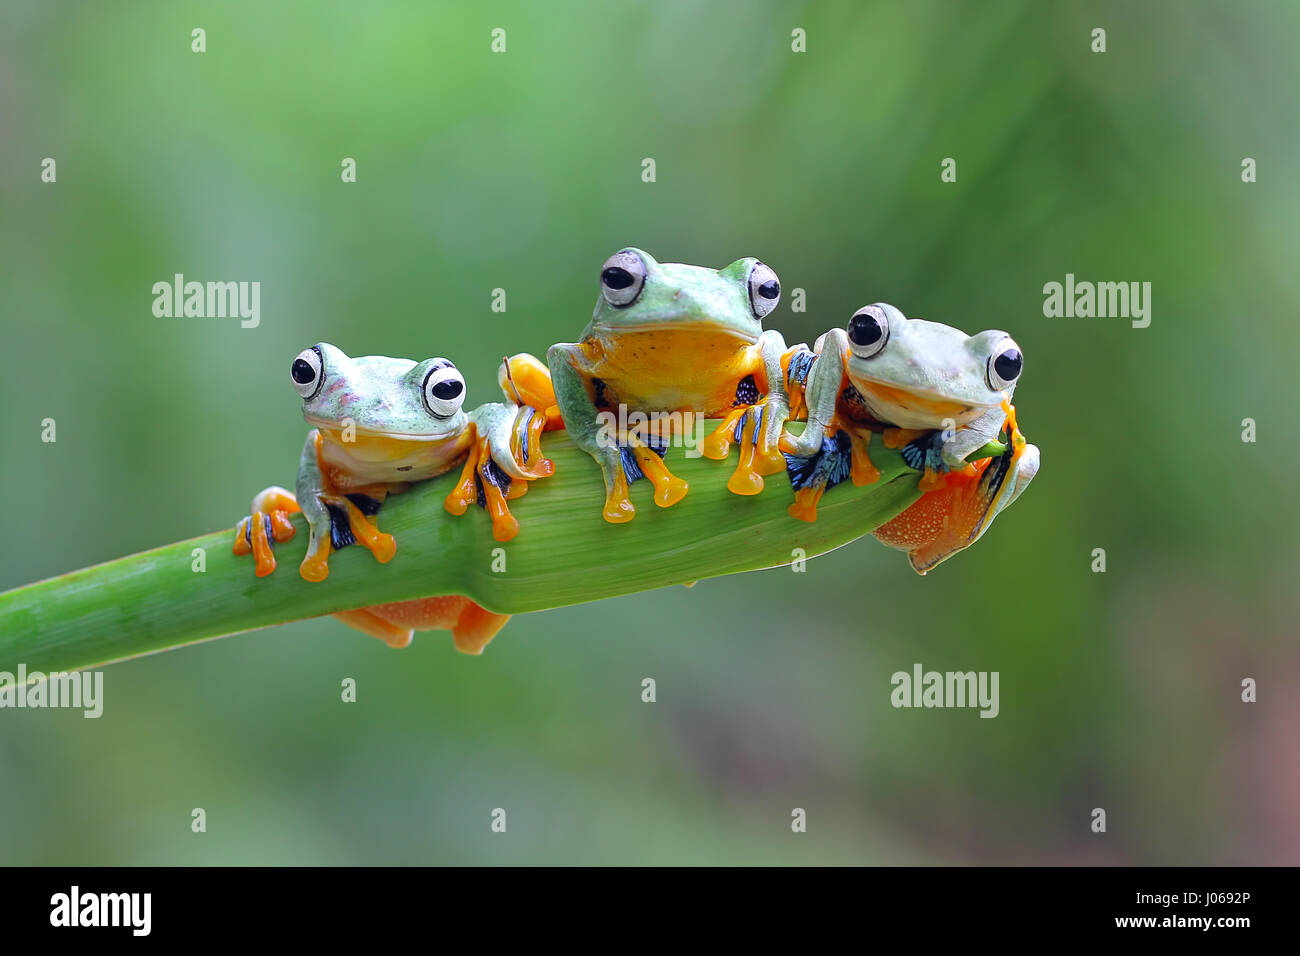 JAKARTA, INDONESIA: CUTE pictures of three little tree frogs